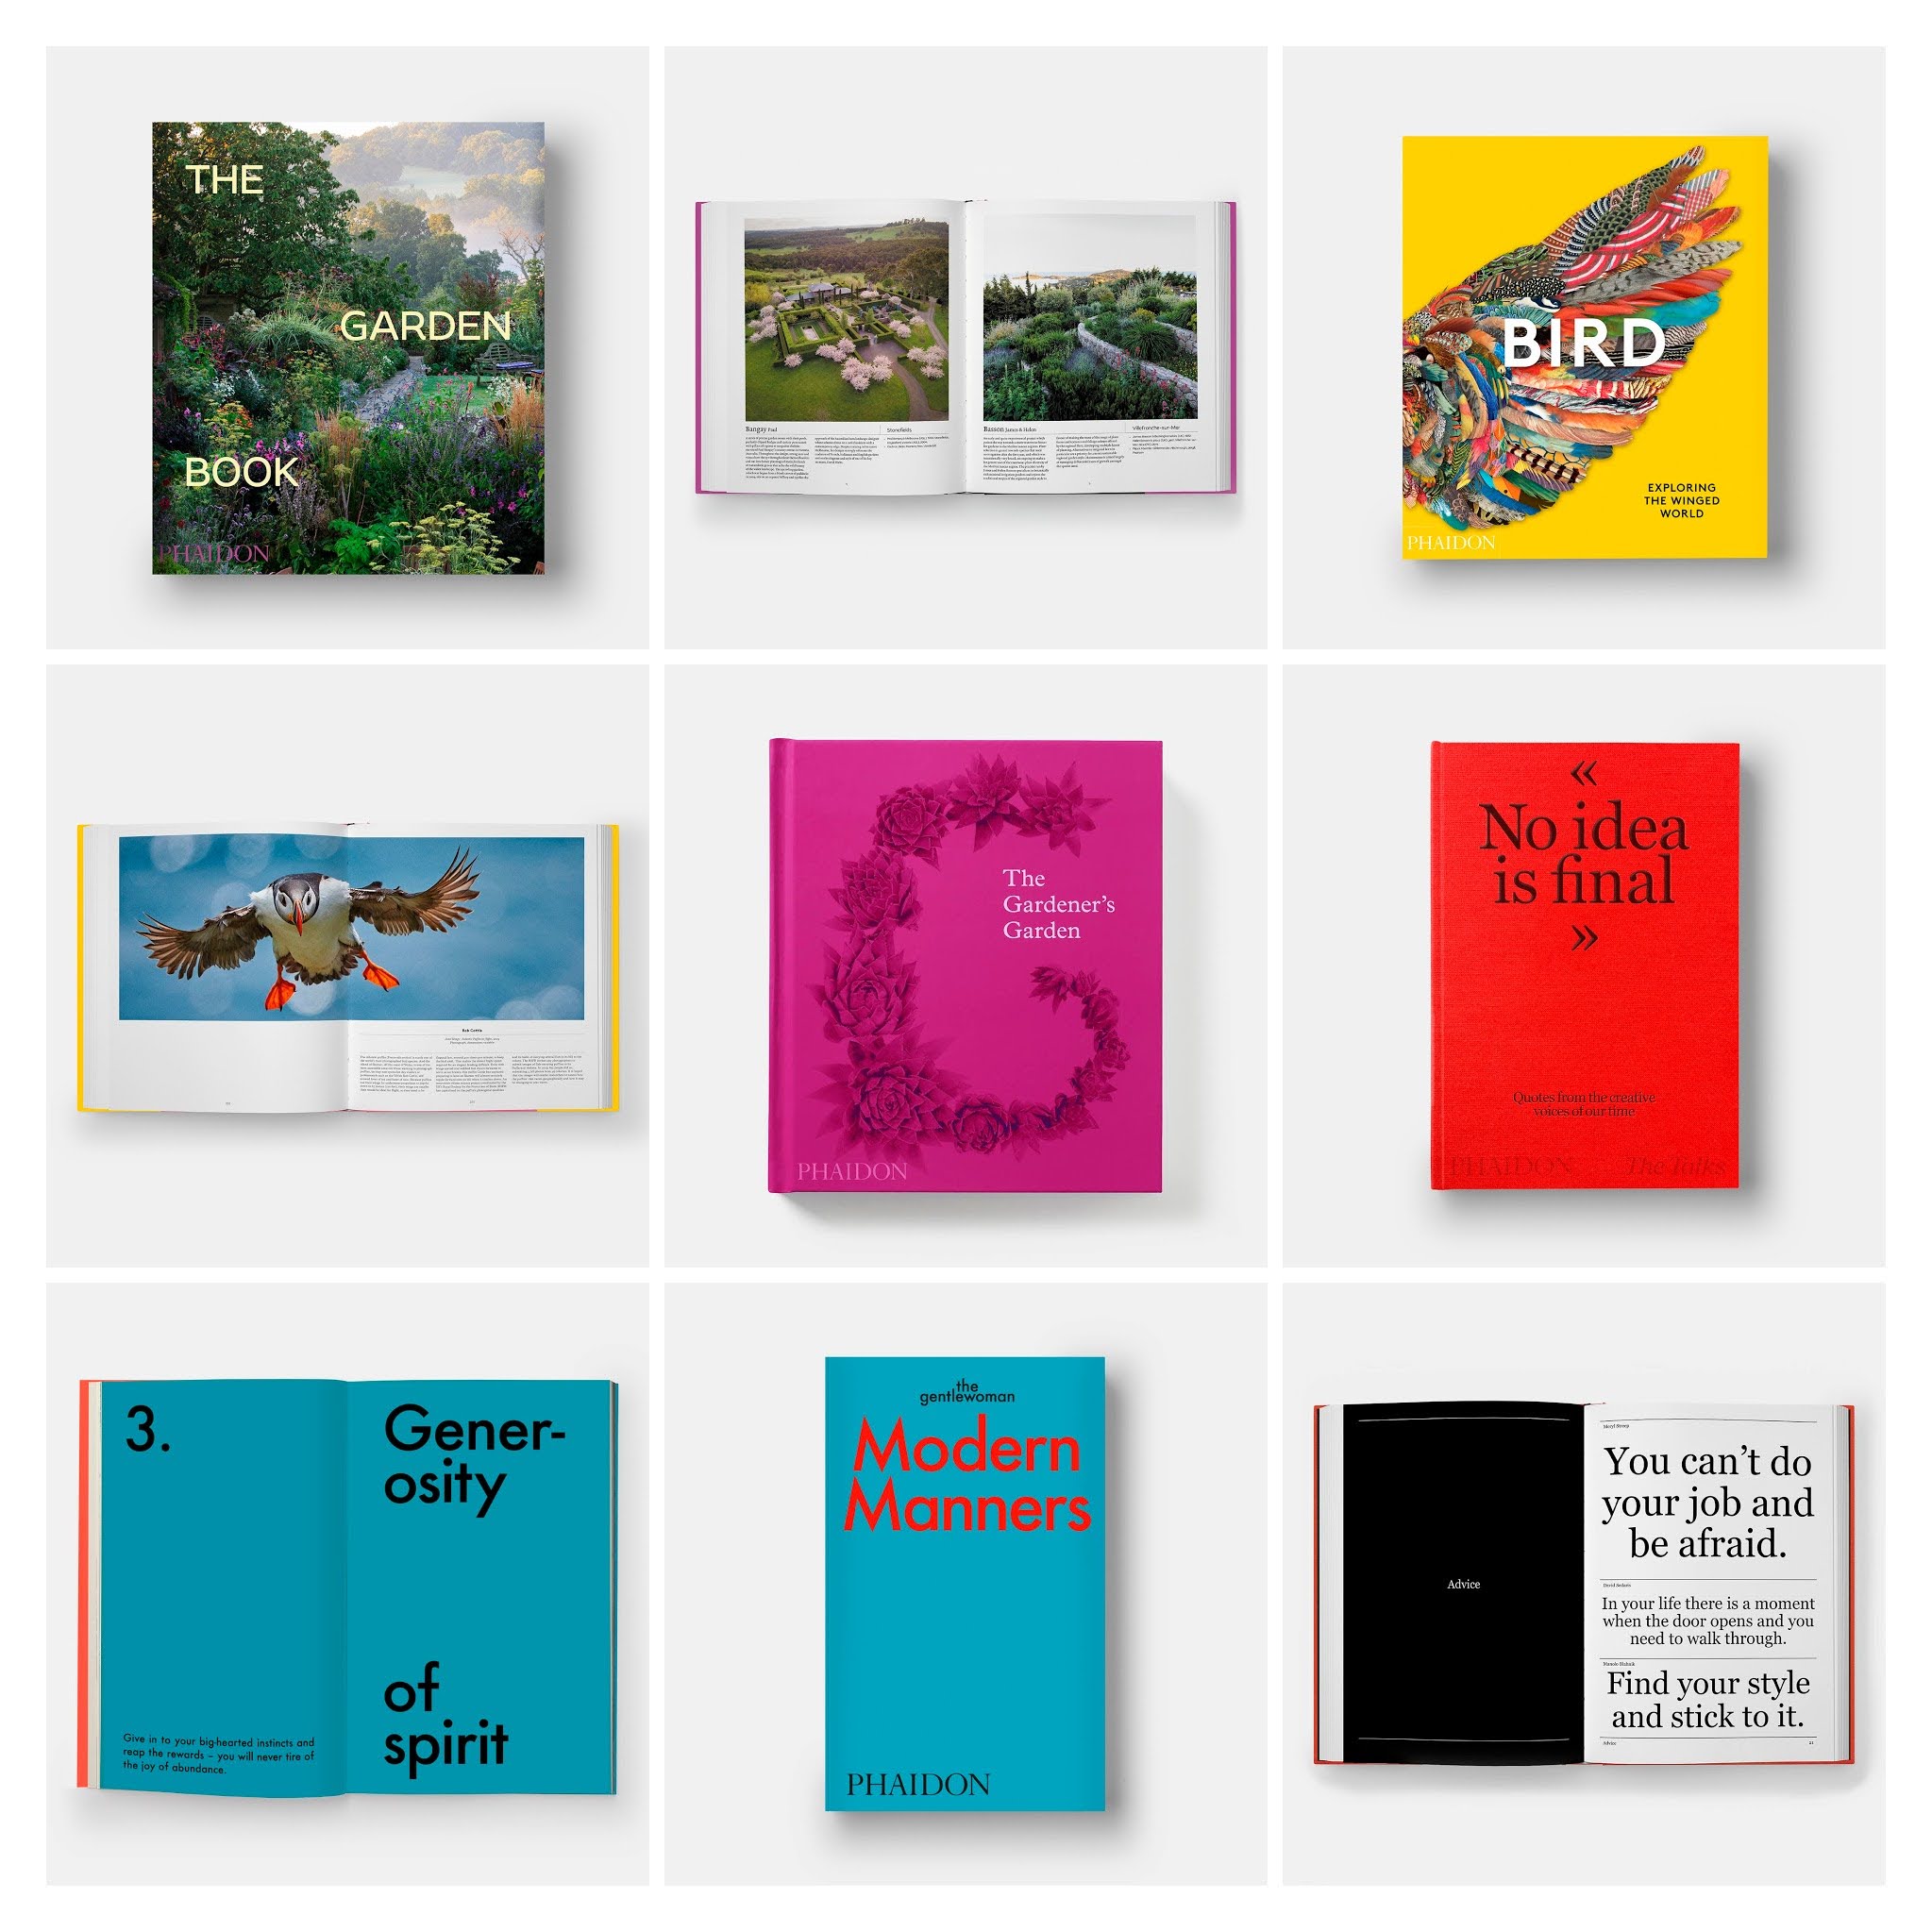 Our general interest list for fall 2021, which includes (from top left, reading down and across): The Garden Book; pages from The Garden Book; Bird; pages from Bird; The Gardener's Garden; The Talks – No Idea is Final; pages from Modern Manners; Modern Manners; pages from The Talks – No Idea is Final